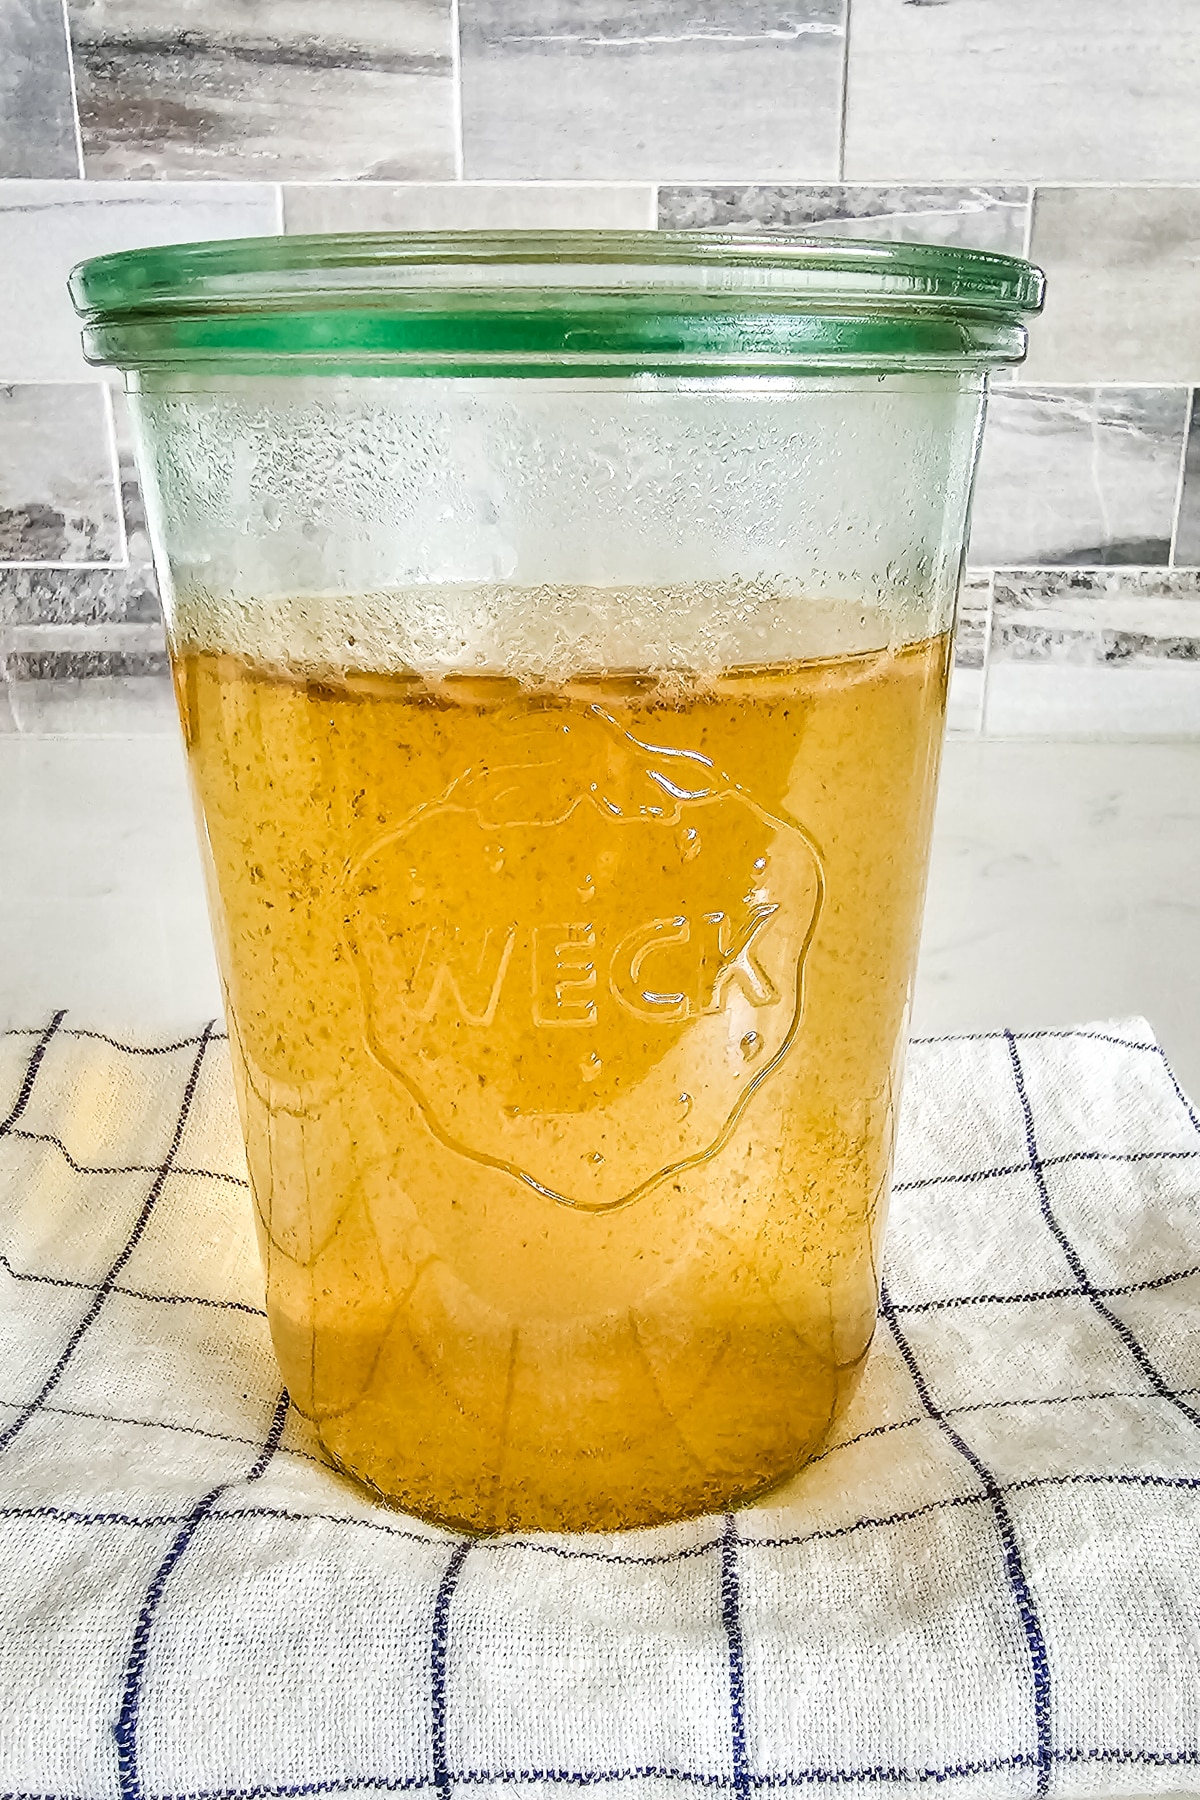 meat broth in a weck jar with a towel underneath.